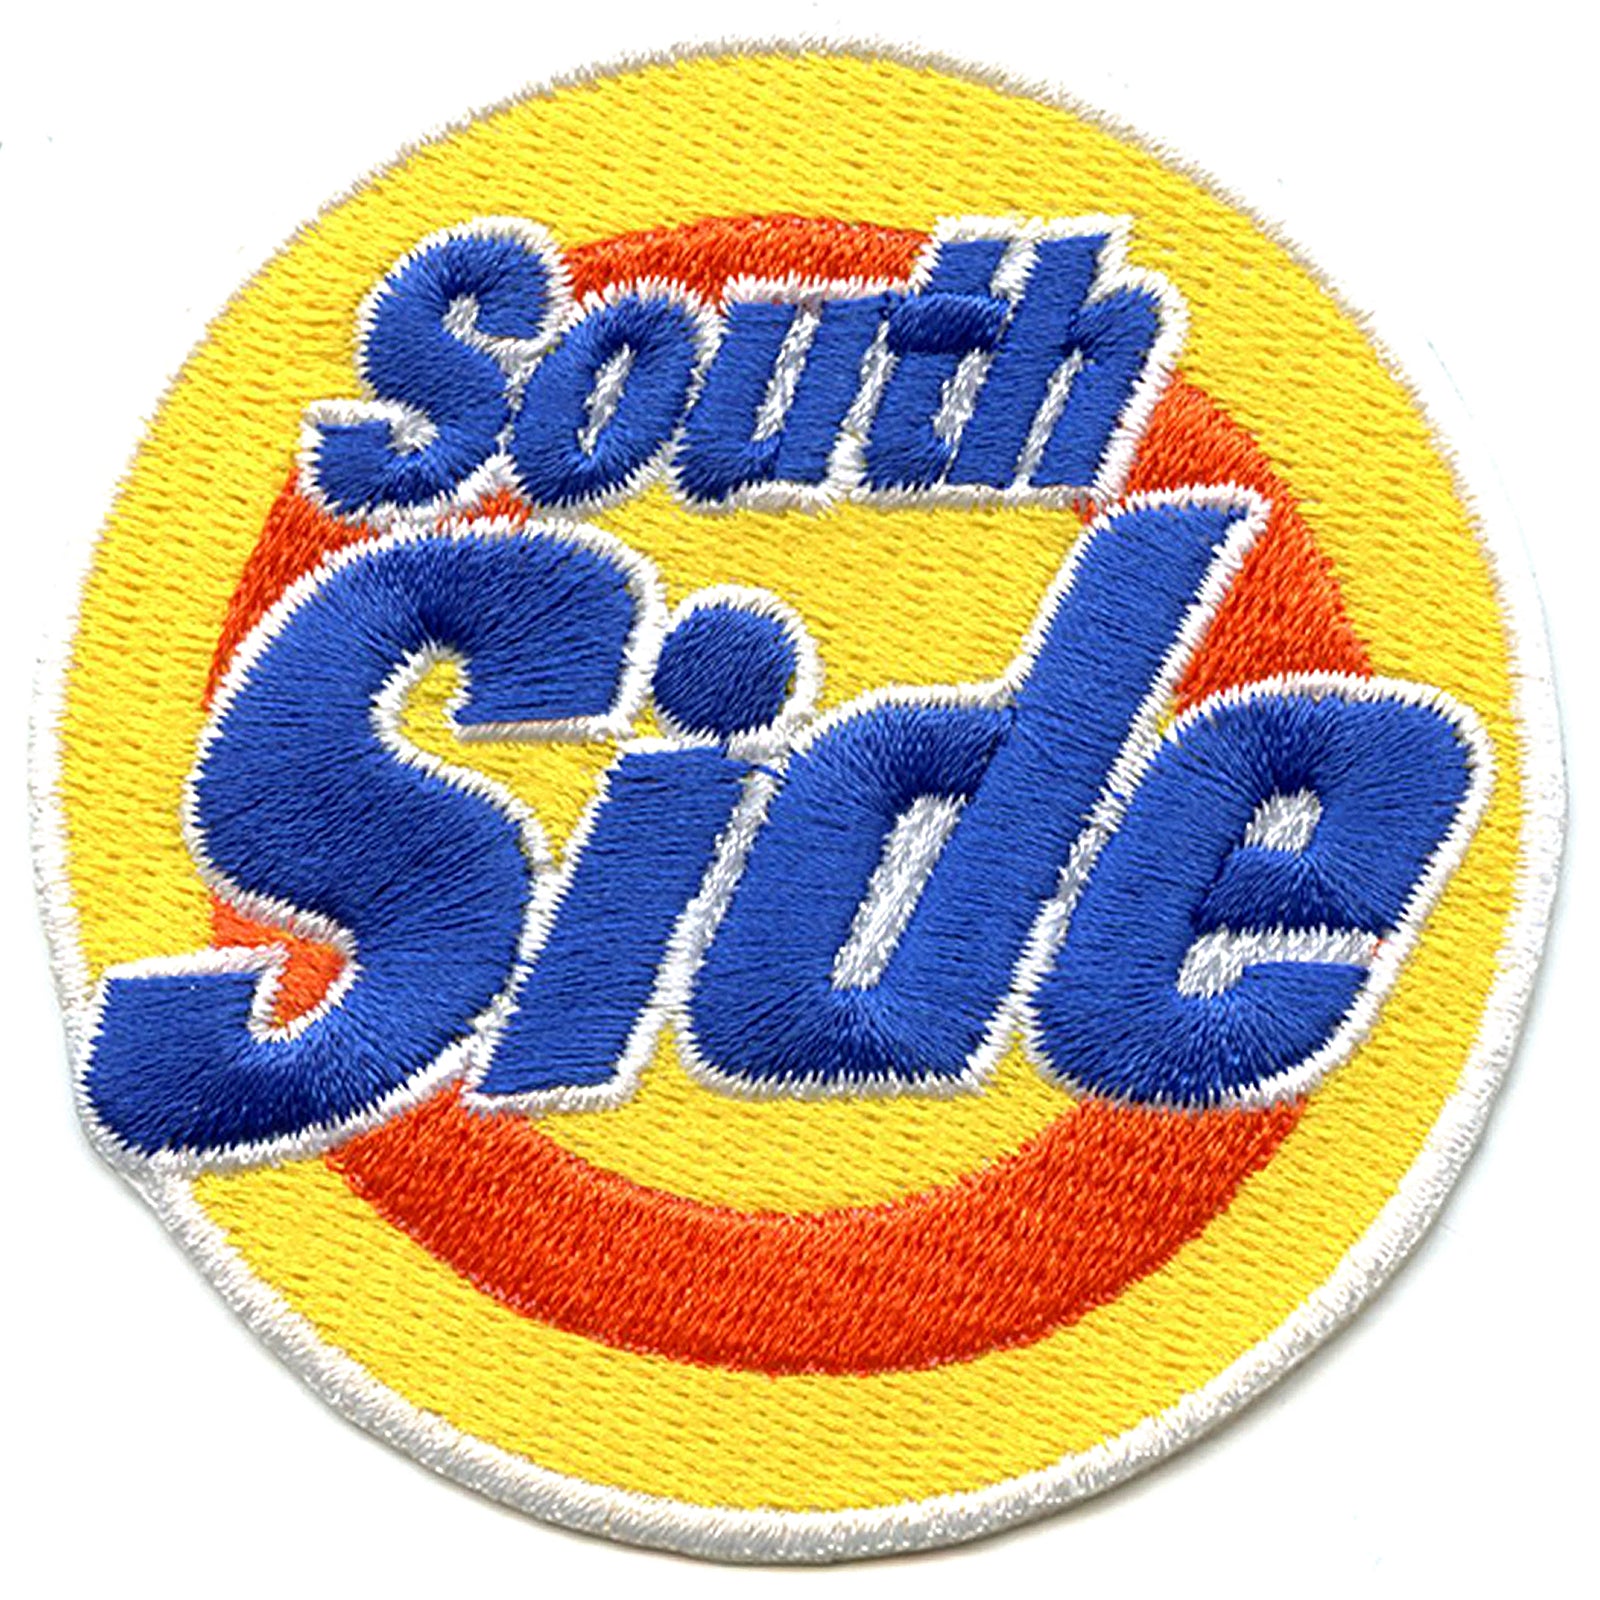 Southside Houston Texas Iron On Embroidered Patch 